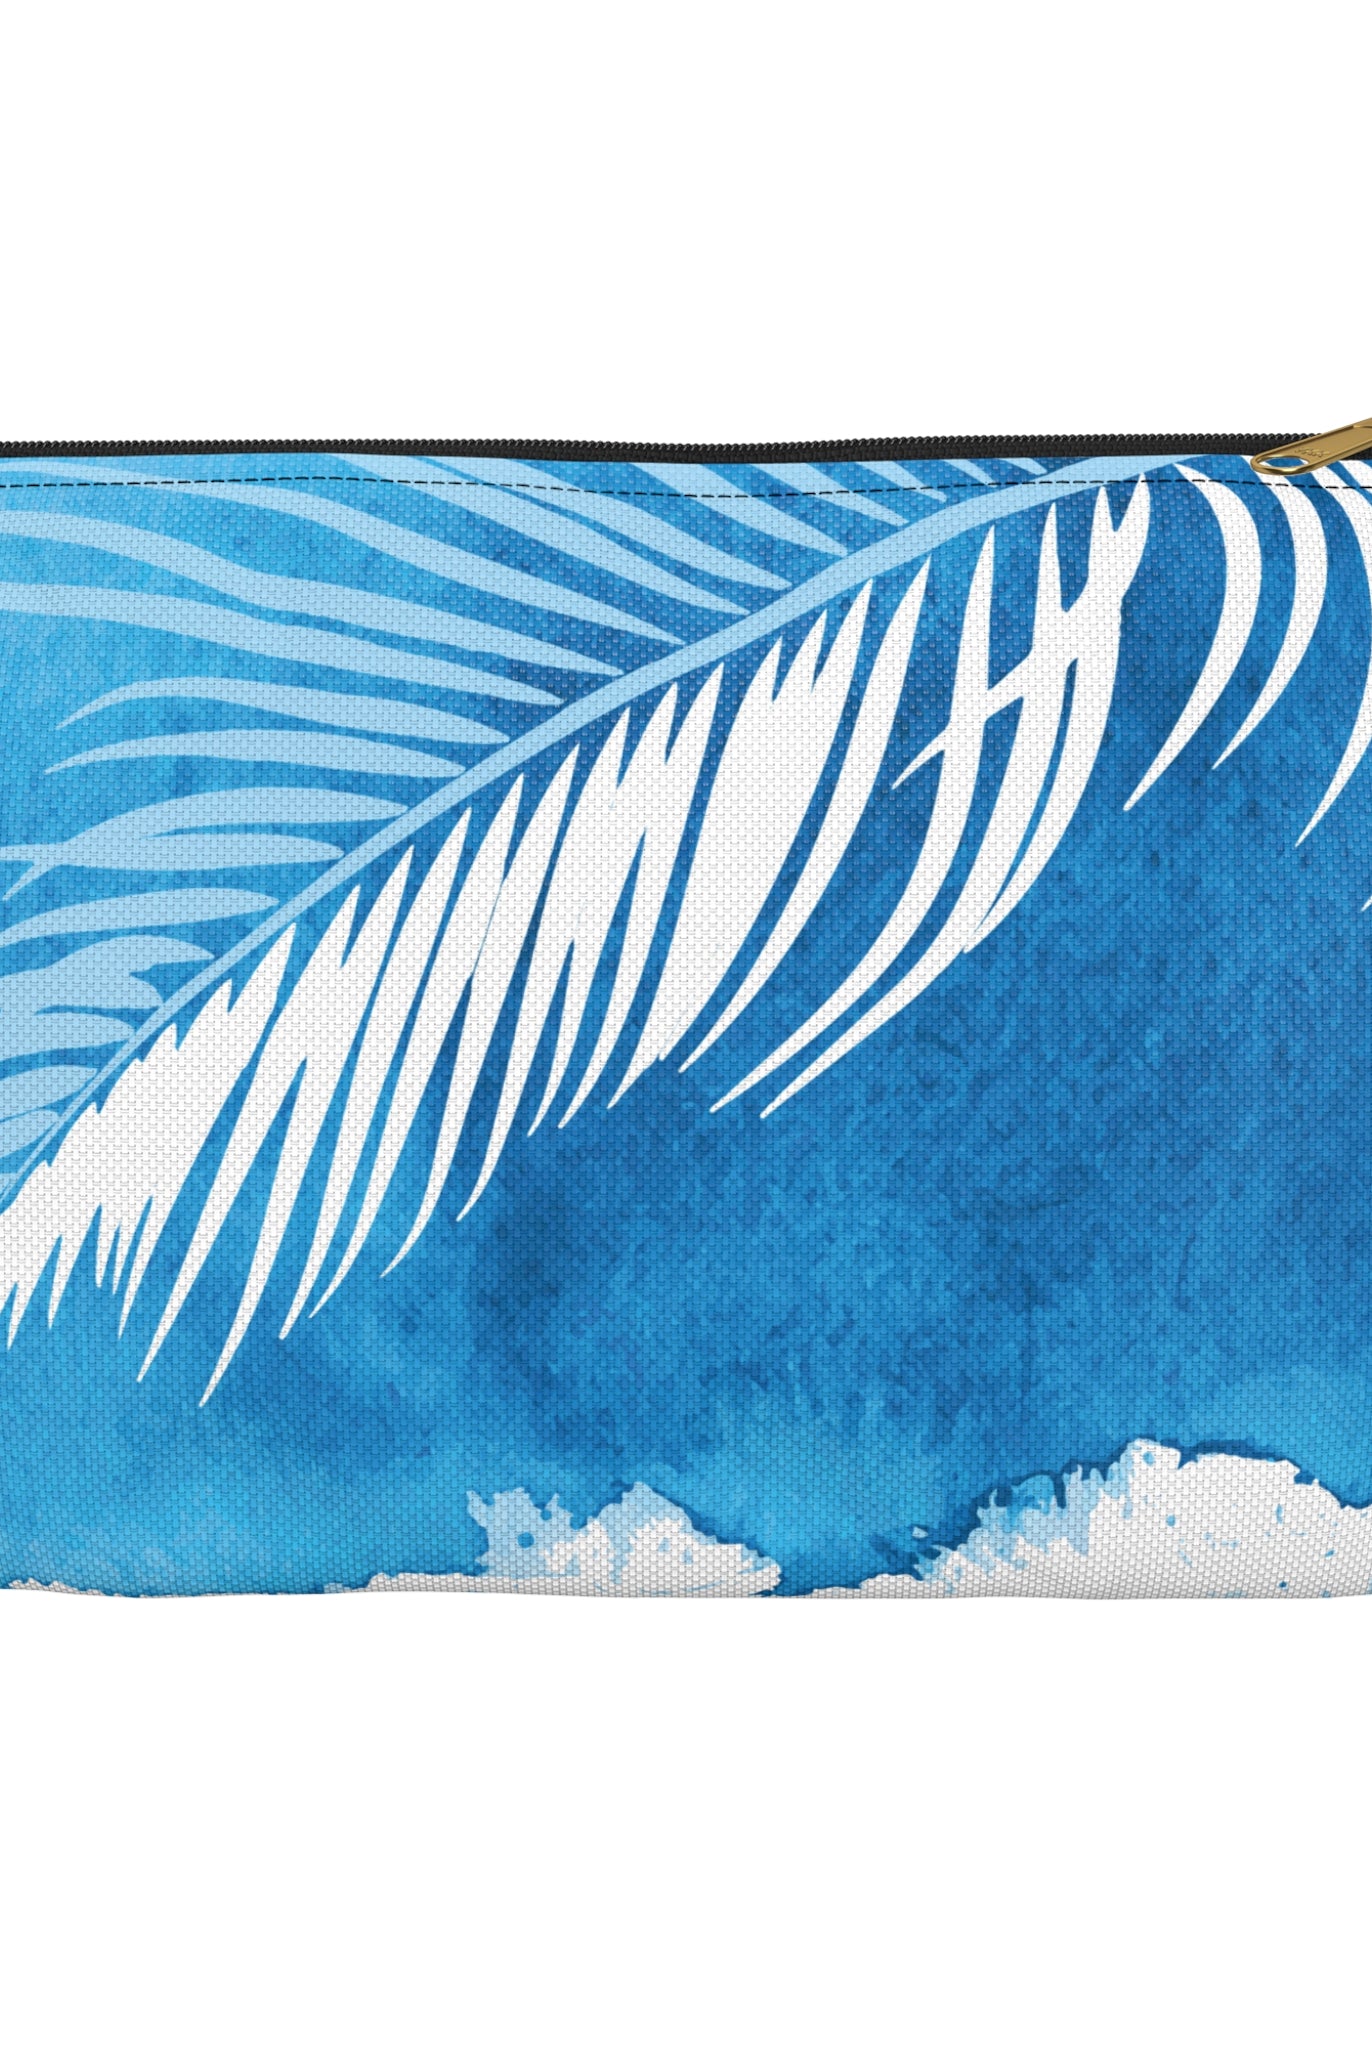 Watercolor Palm Accessory and Cosmetic Bag - The Local Banyan